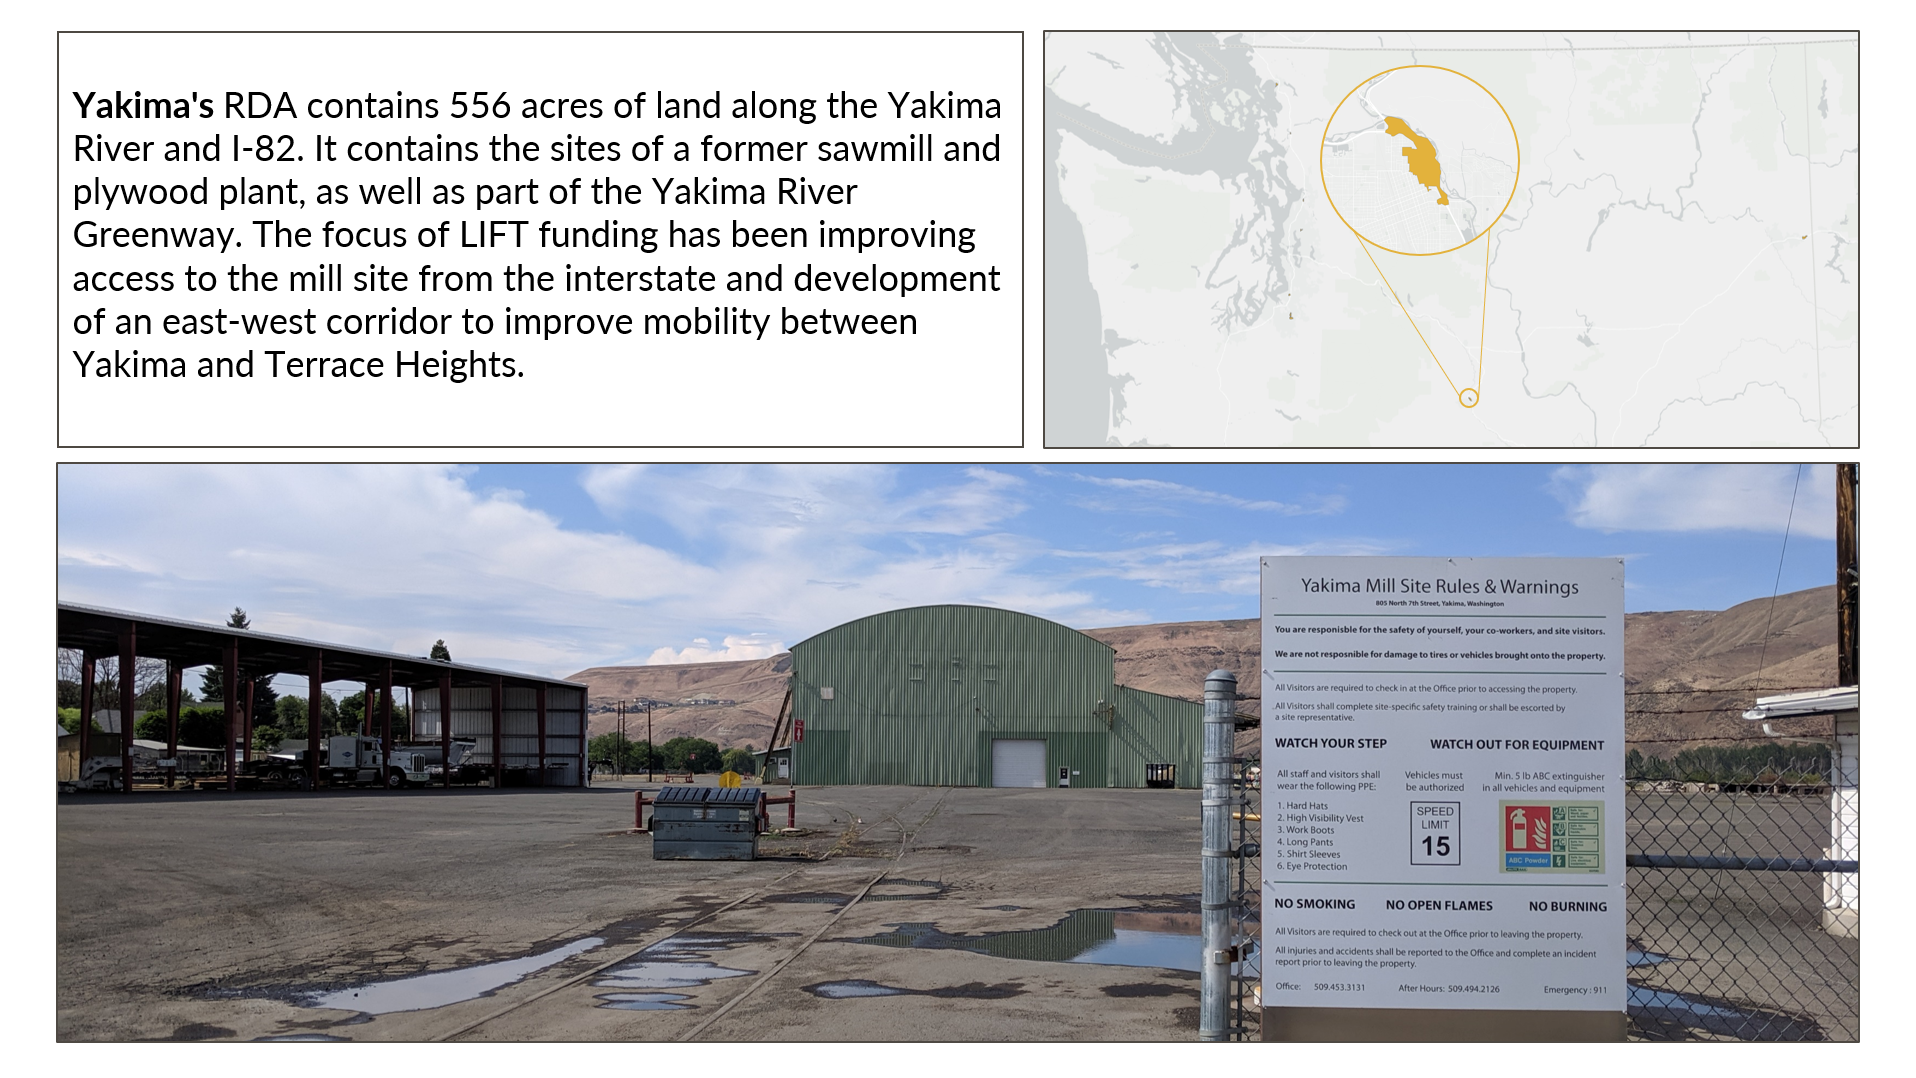 Grpahic showing map of RDA in Washington, a photo in that RDA, and the following text: Yakima's RDA contains 556 acres of land along the Yakima River and I-82. It contains the sites of a former sawmill and plywood plant, as well as part of the Yakima River Greenway. The focus of LIFT funding has been improving access to the mill site from the interstate and development of an east-west corridor to improve mobility between Yakima and Terrace Heights.
                  